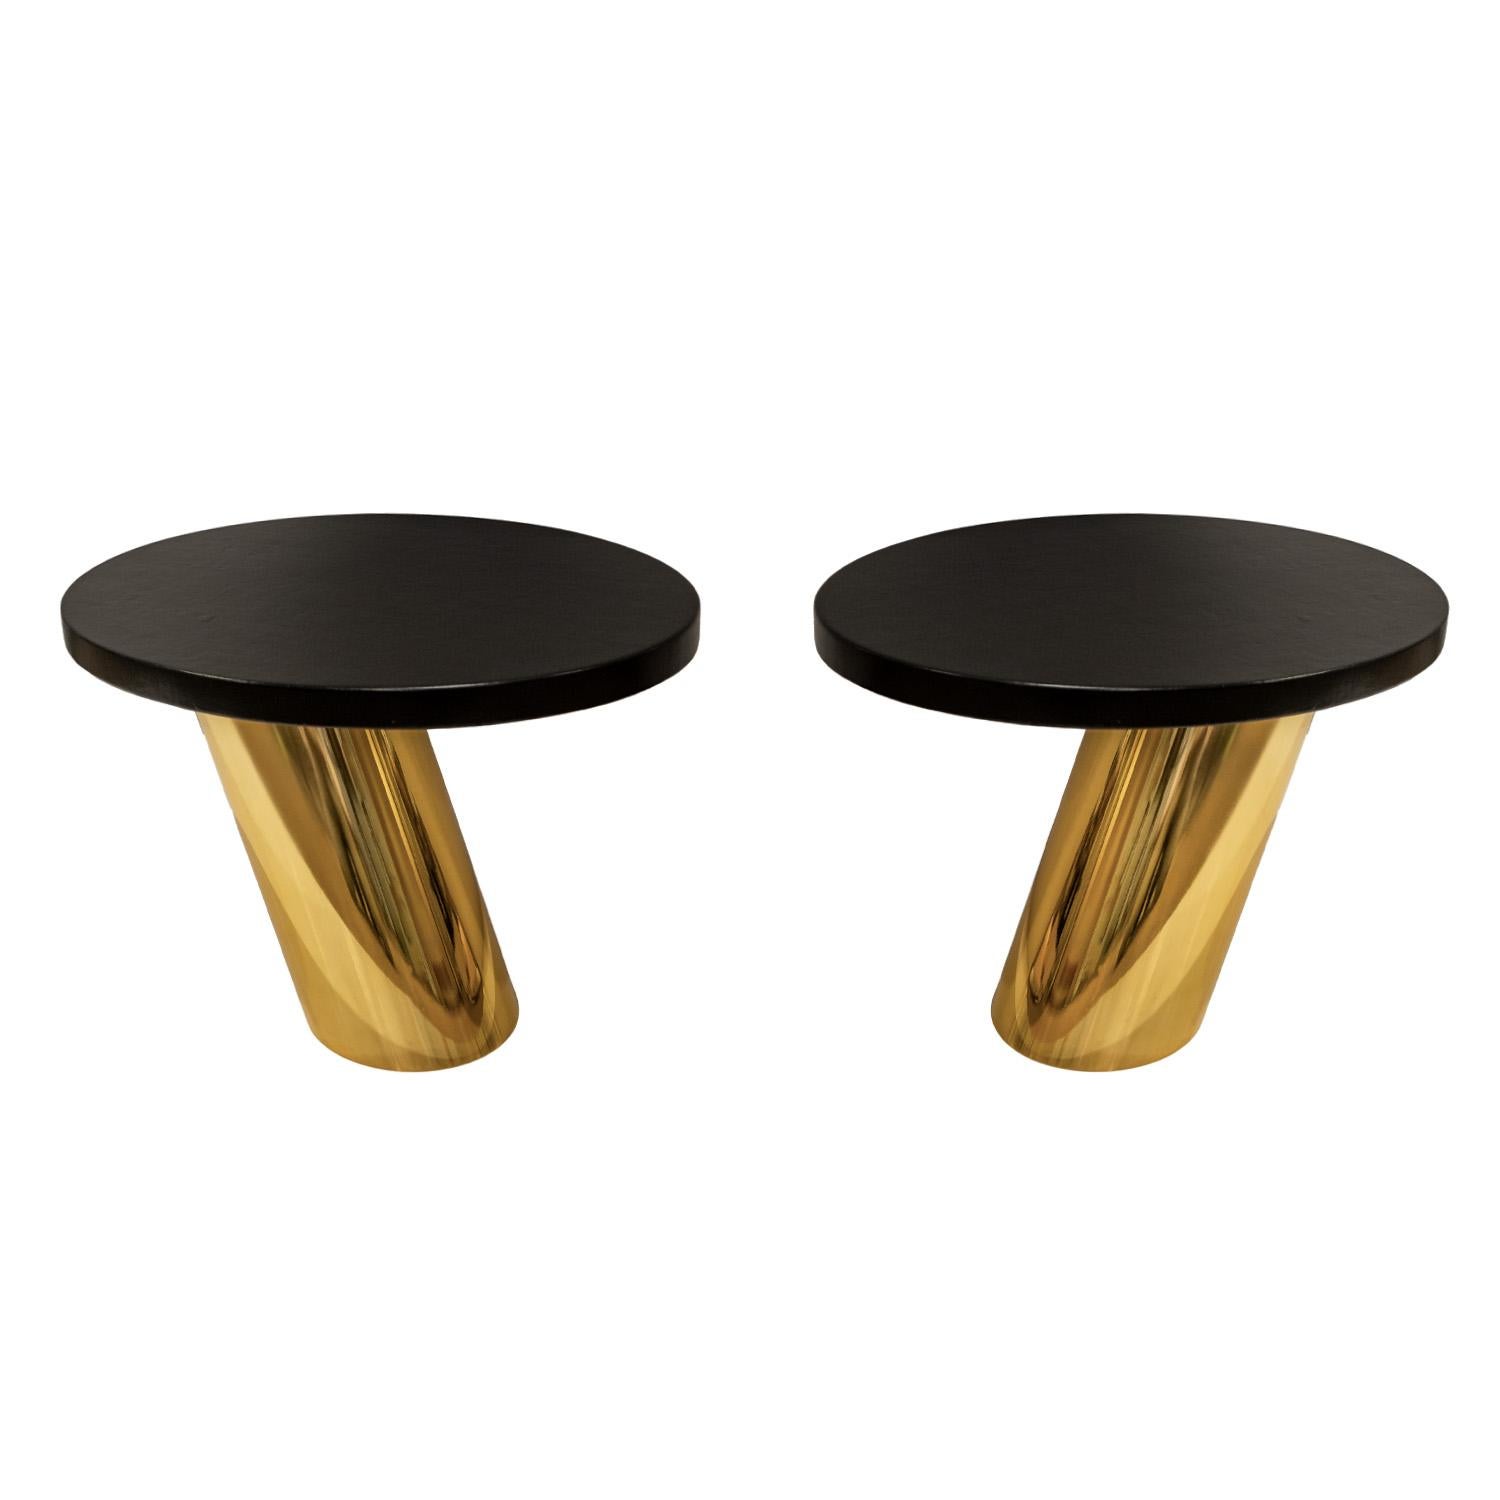 Rare pair of “Mushroom Tables”, cantilevered with black oval leather tops on solid tubular brass bases which fit snugly over heavy lead weights by Karl Springer, American 1990 (both signed and dated “Karl Springer 1990” on underside). The superb